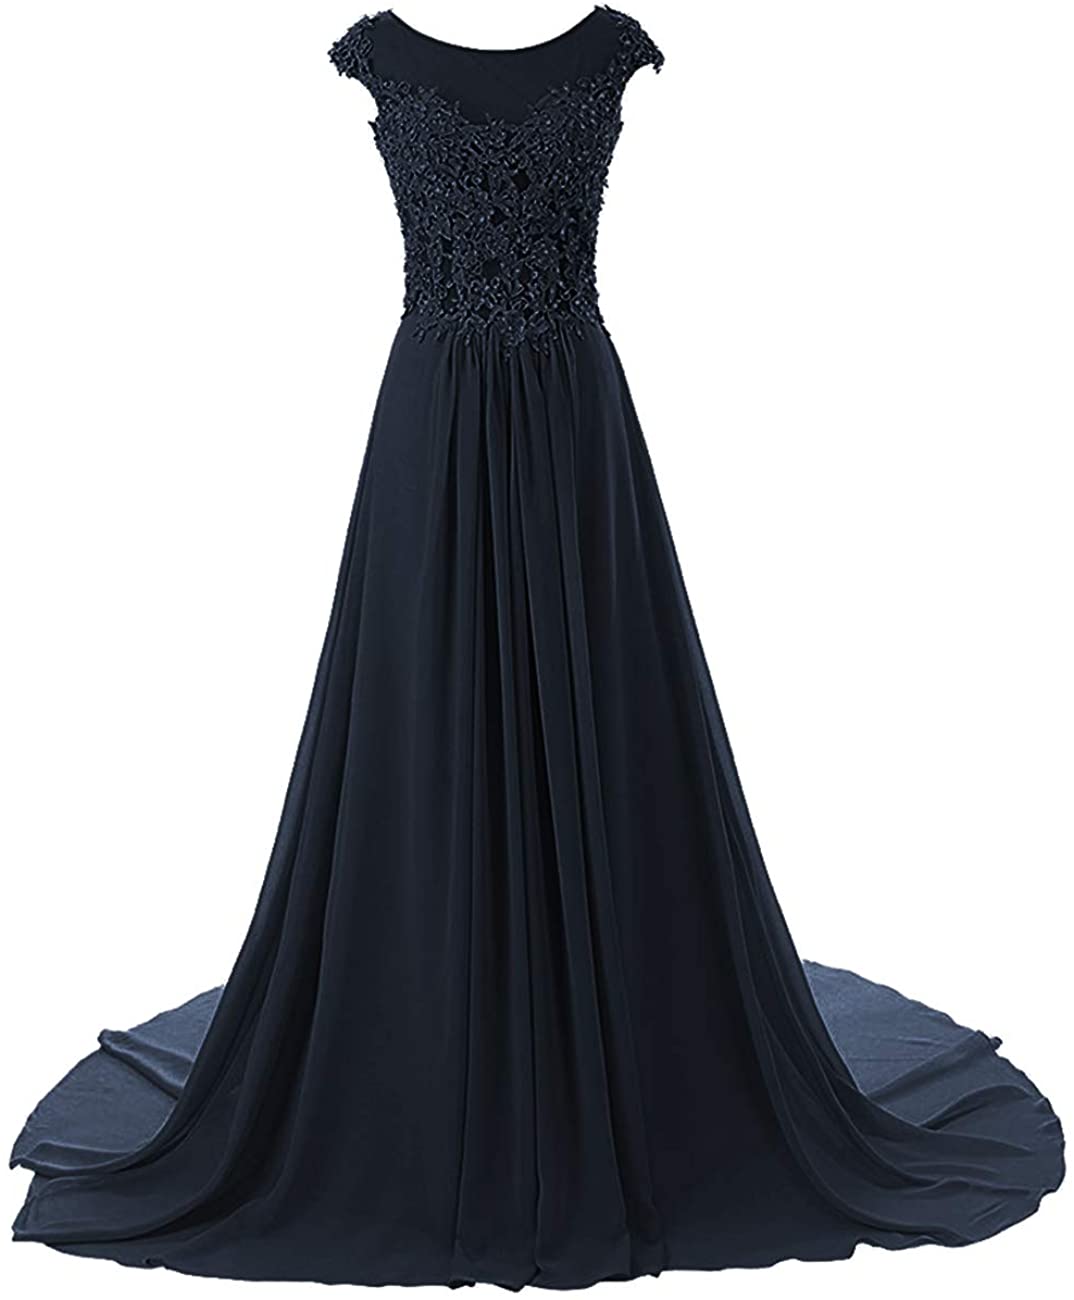 Long Chiffon Prom Gown Evening Formal Party Cocktail Prom Dress Stock size 6-22 